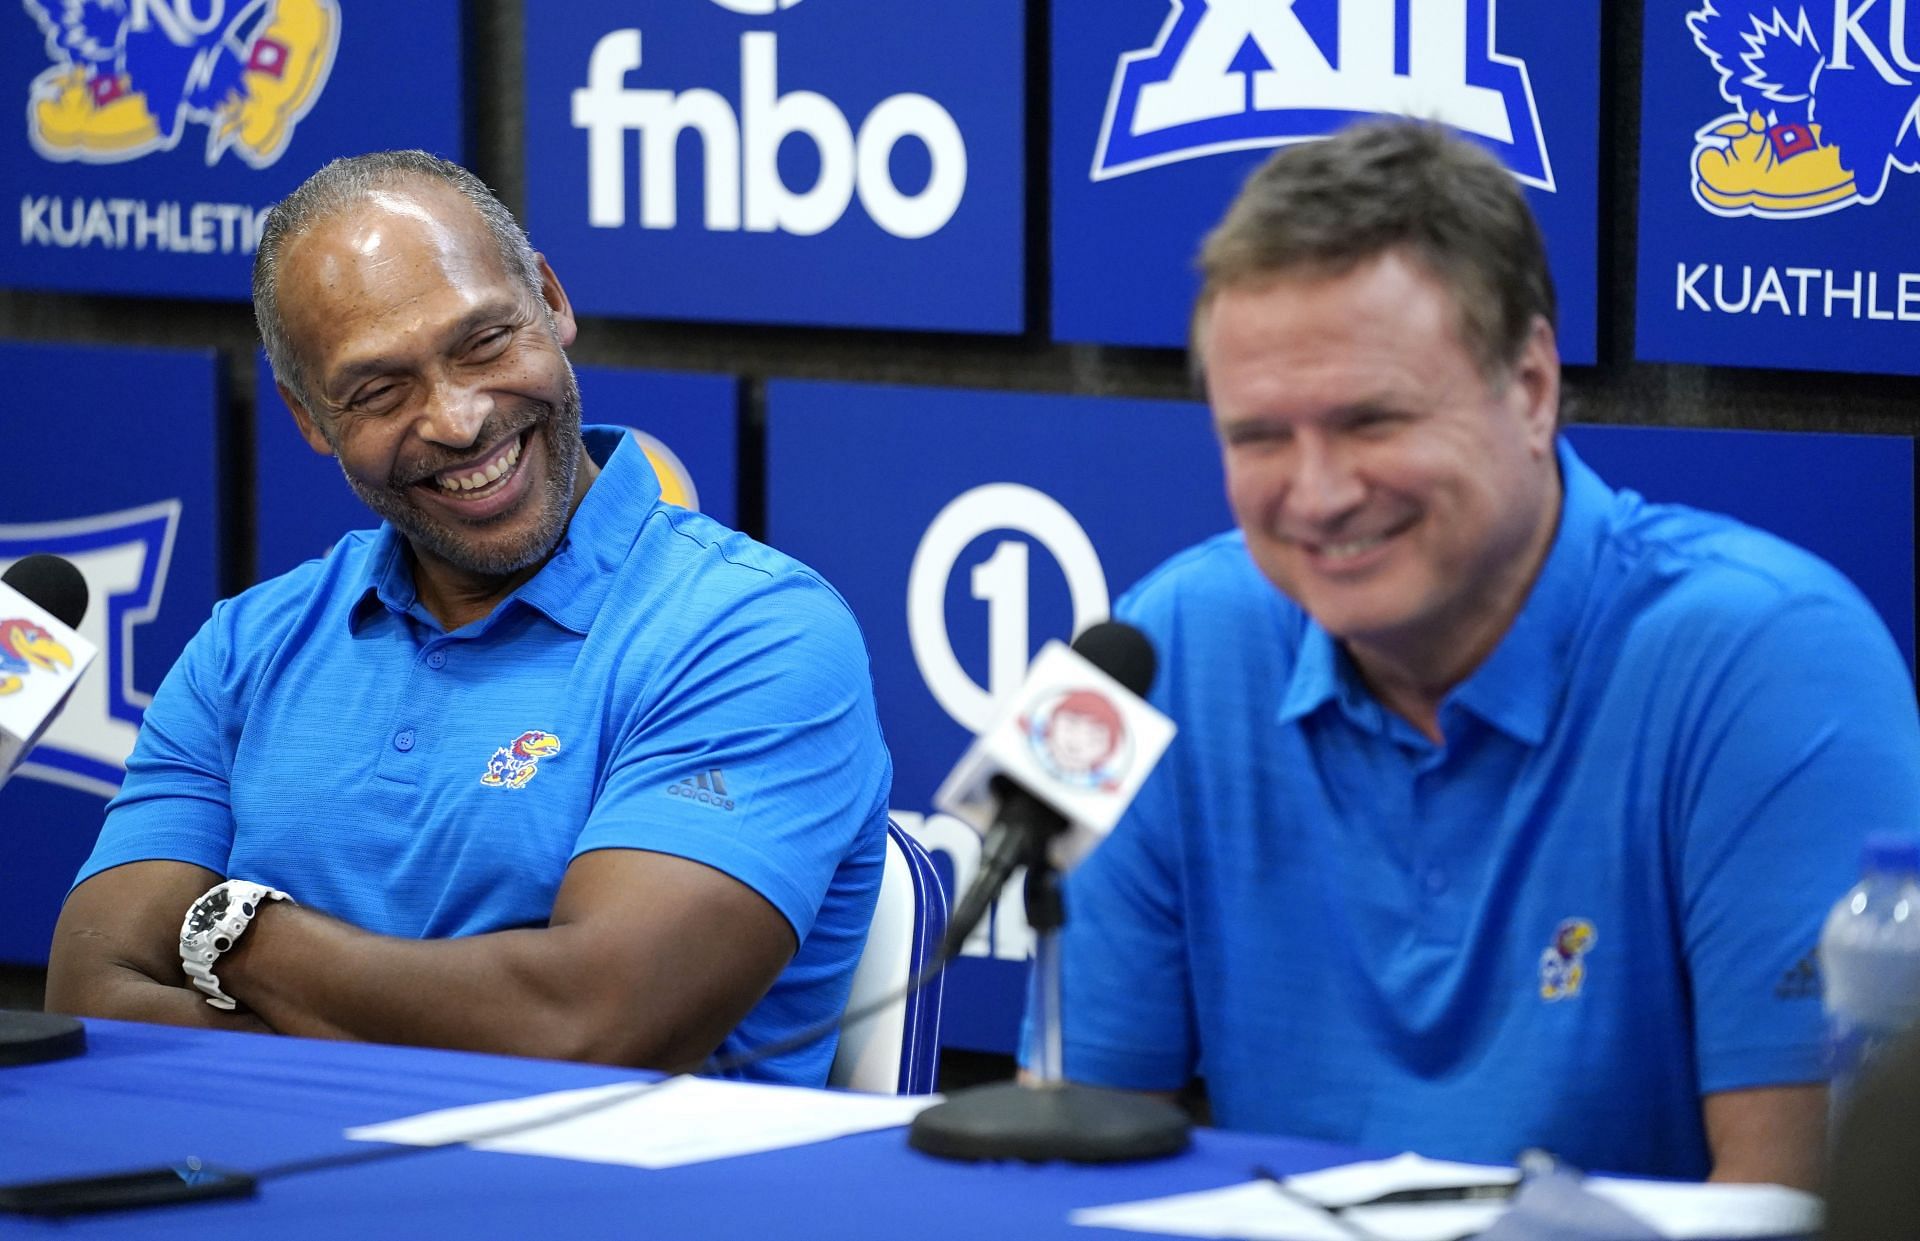 Bill Self is not coaching today and will be replaced by Norm Roberts (Image via Getty Images)